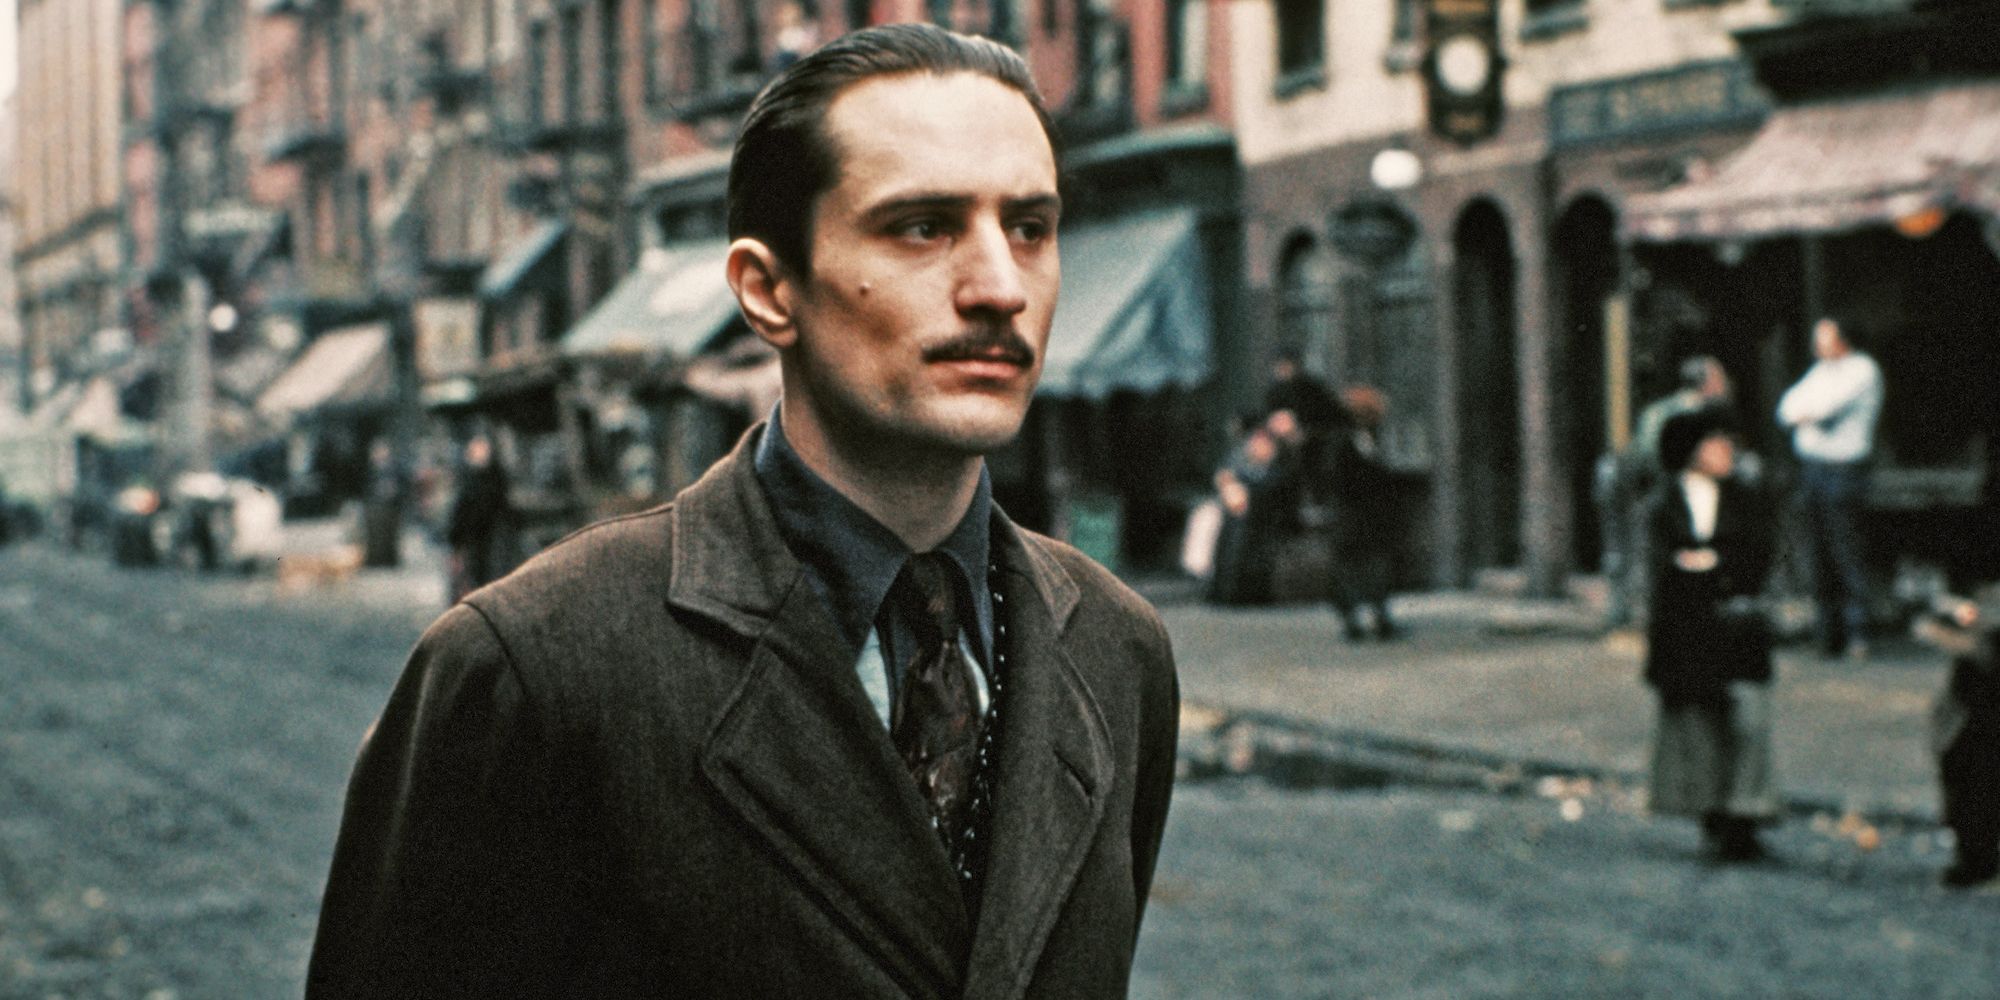 Robert De Niro as young Vito Corleone standing on the street in The Godfather Part II.